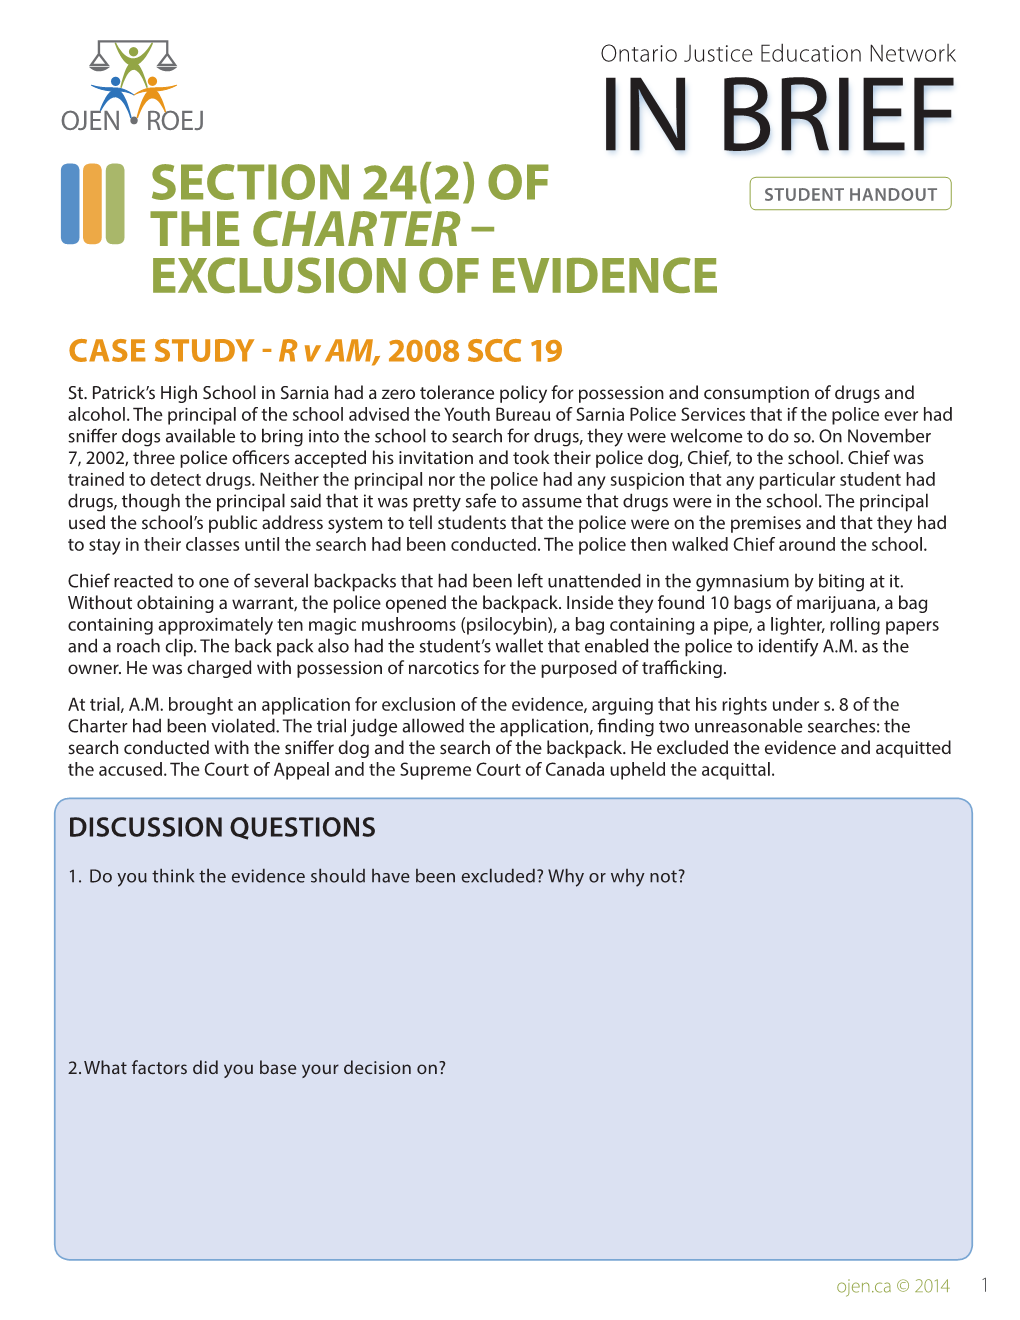 In Brief: Section 24(2) of the Charter – Exclusion of Evidence